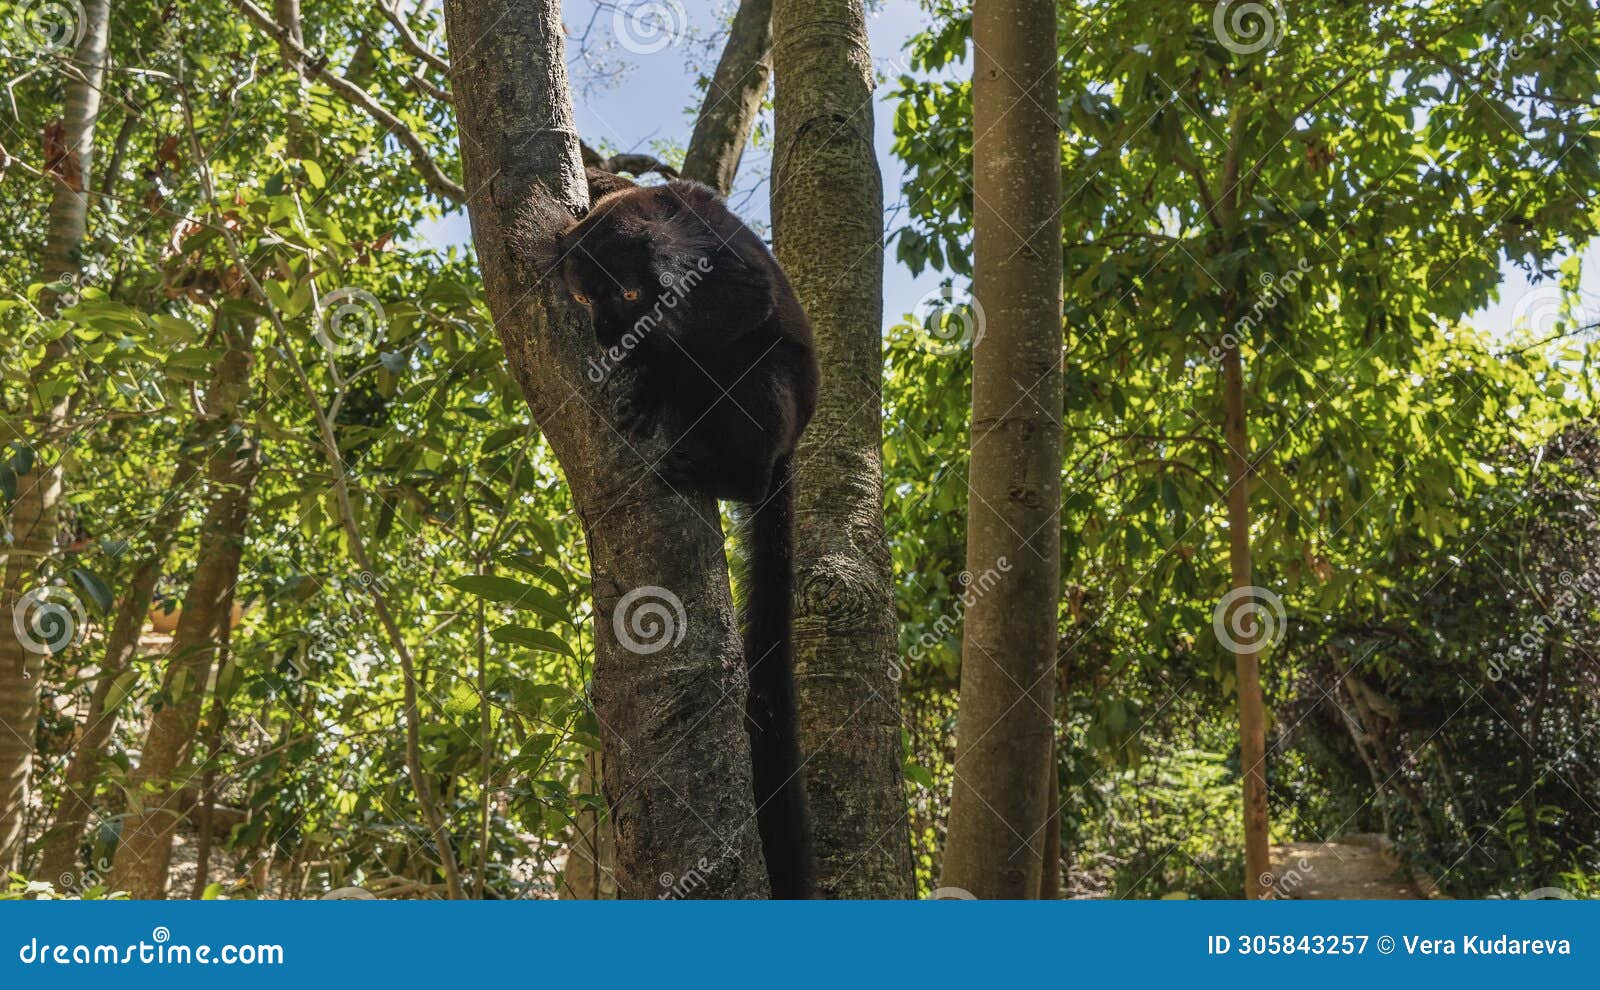 a black lemur eulemur macaco is sitting on a tree trunk, looking down.